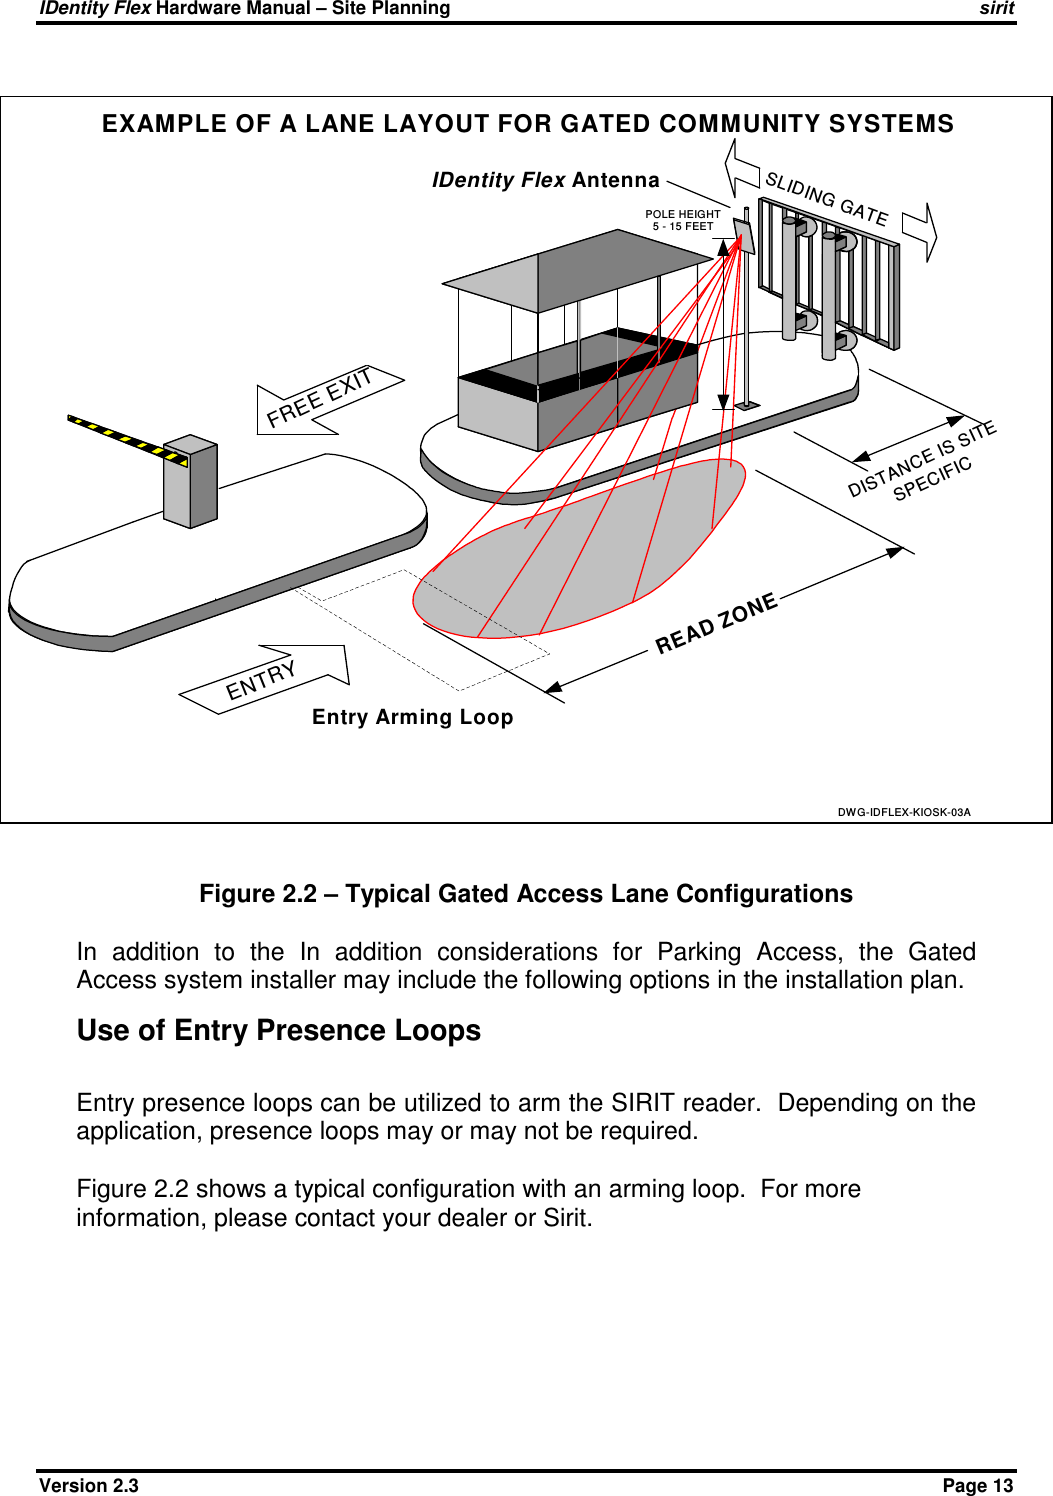 IDentity Flex Hardware Manual – Site Planning    sirit Version 2.3    Page 13   Figure 2.2 – Typical Gated Access Lane Configurations  In  addition  to  the  In  addition  considerations  for  Parking  Access,  the  Gated Access system installer may include the following options in the installation plan. Use of Entry Presence Loops  Entry presence loops can be utilized to arm the SIRIT reader.  Depending on the application, presence loops may or may not be required.     Figure 2.2 shows a typical configuration with an arming loop.  For more information, please contact your dealer or Sirit.    IDentity Flex AntennaREAD ZONEDISTANCE IS SITESPECIFICENTRYFREE EXITEXAMPLE OF A LANE LAYOUT FOR GATED COMMUNITY SYSTEMSDW G -ID FLEX -KIO SK-03APOLE HEIG HT5 - 15 FEETSLIDING GATEEntry Arming Loop